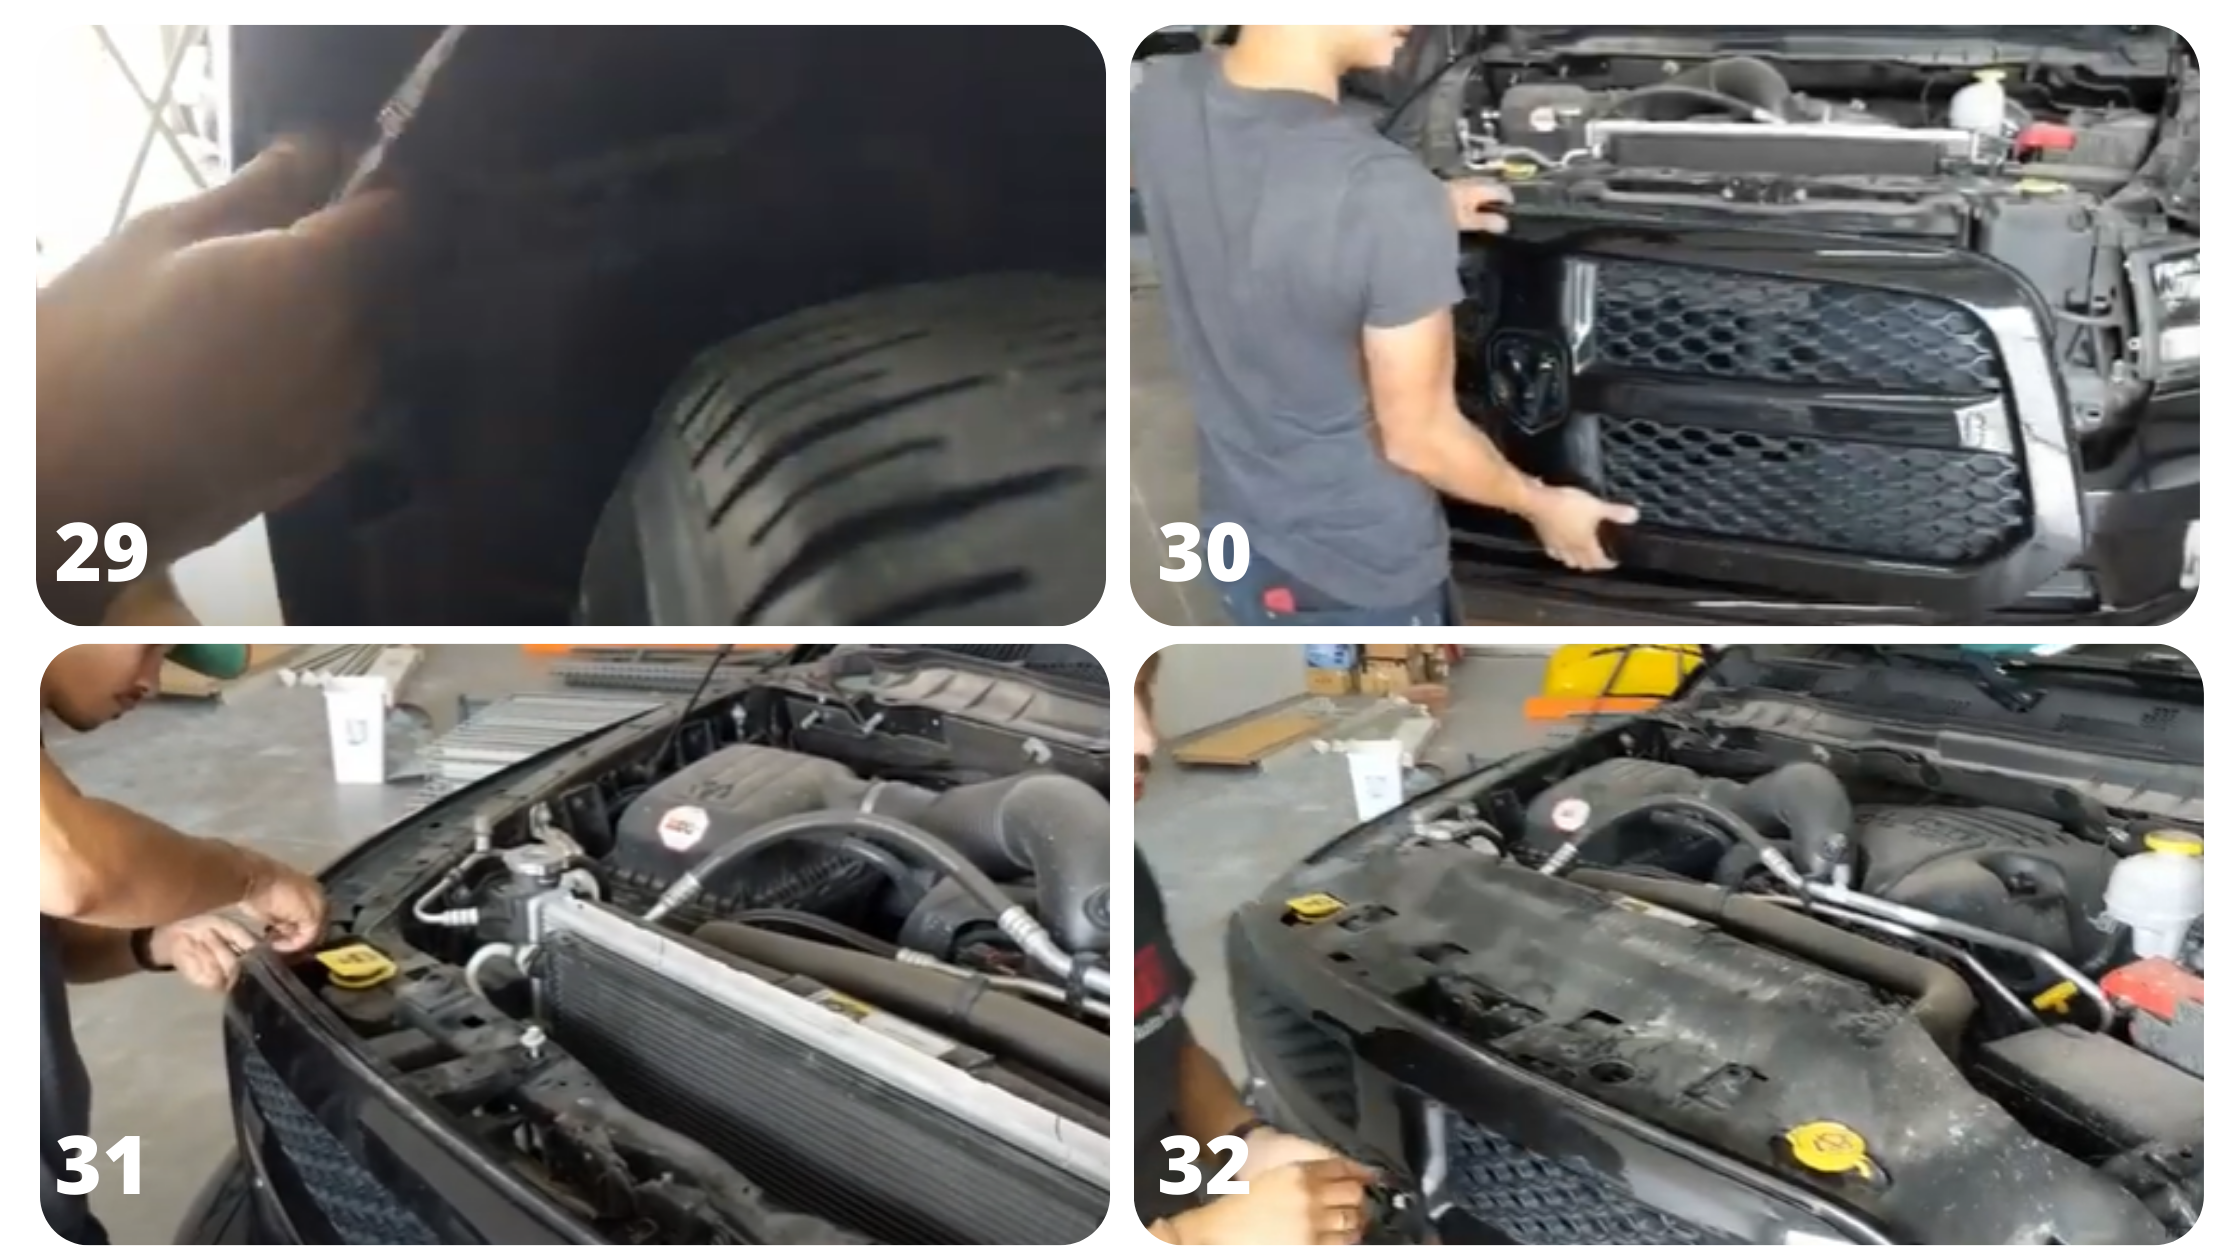 2014-2018 Dodge Ram 1500 Front Bumper Removal and Replacement put back bolts and the radiator cover